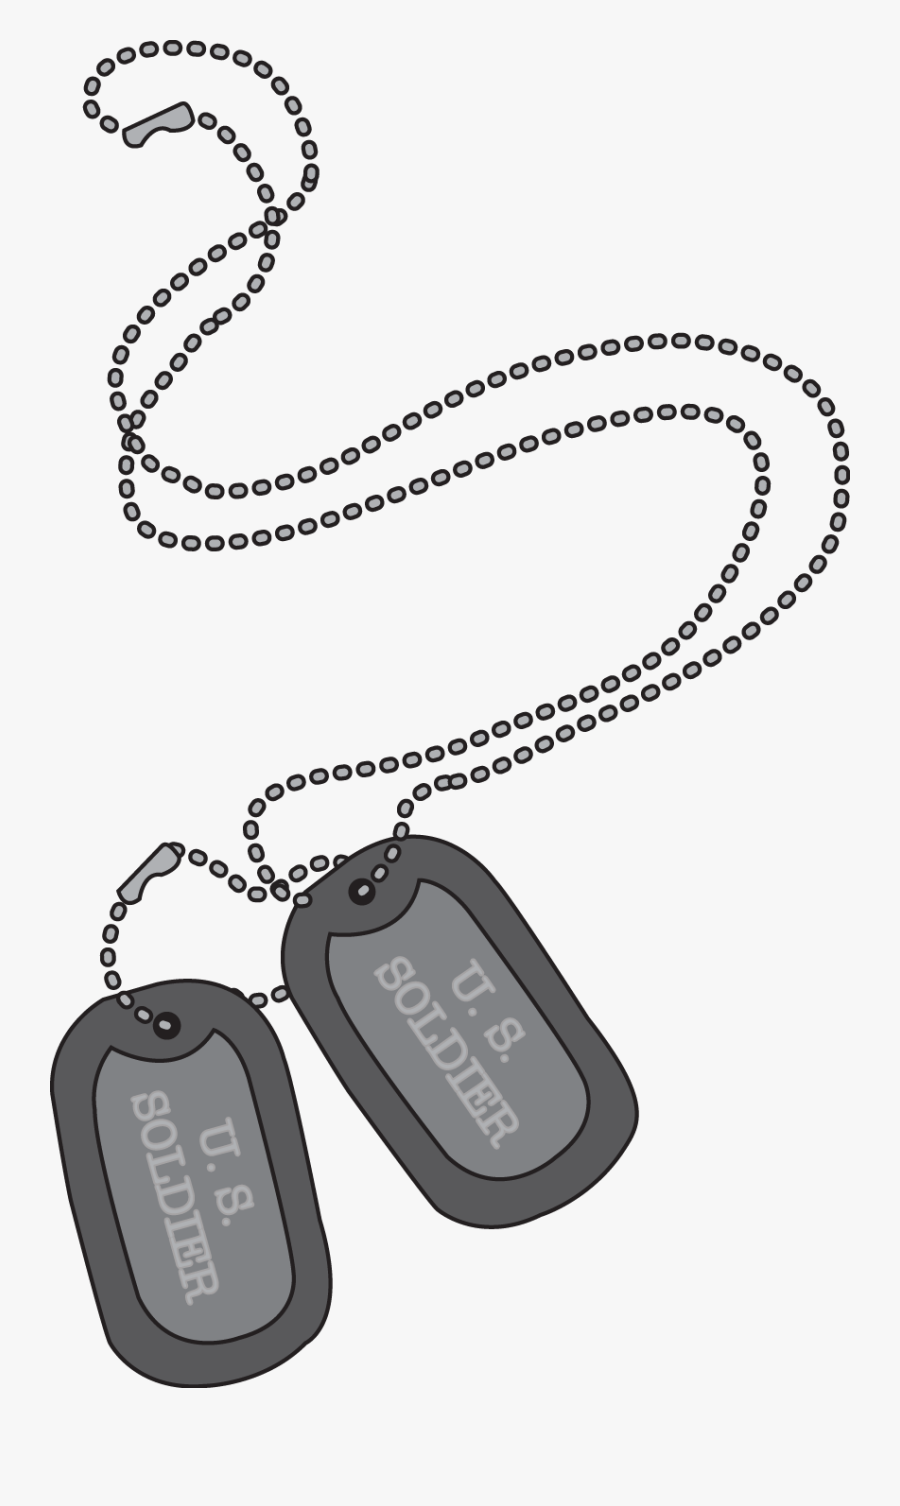 Photo By @daniellemoraesfalcao - Free Military Dog Tags Clipart, Transparent Clipart